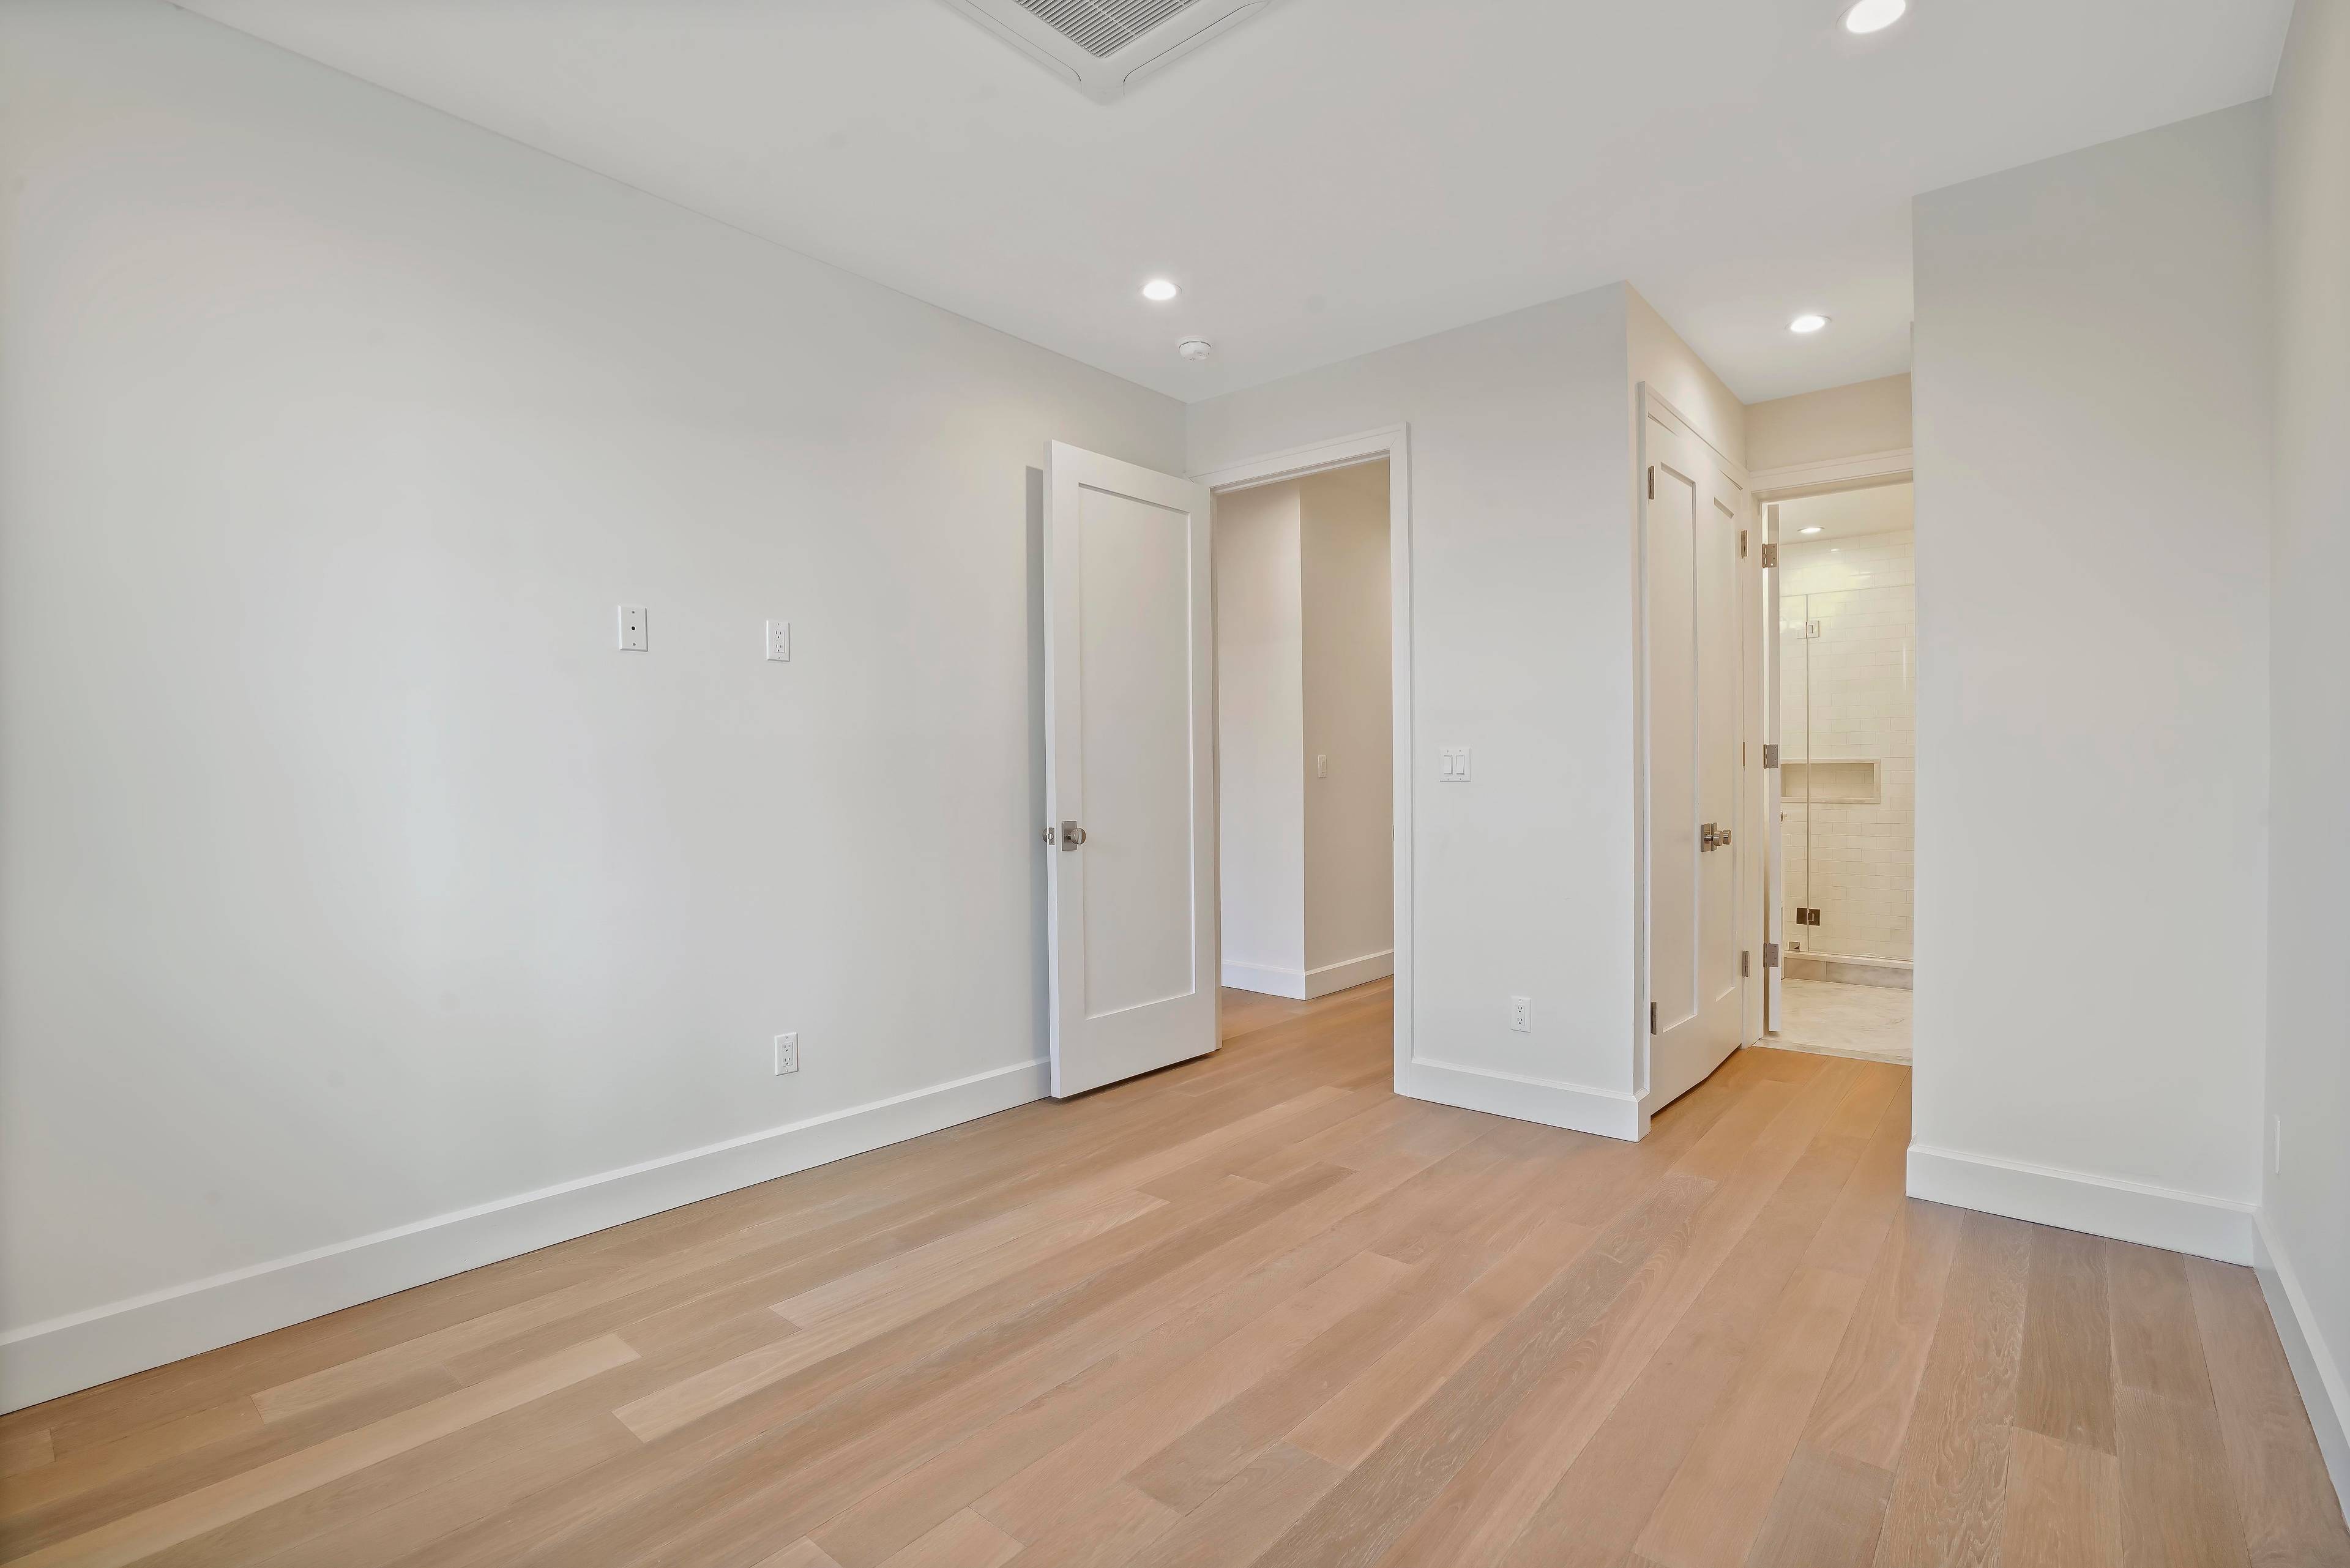 Wishlist Granted New Construction Condo with Spacious 2 Bedroom with office, but it is the additional Massive Lower Level that makes this apartment unmatched anywhere in Brooklyn !